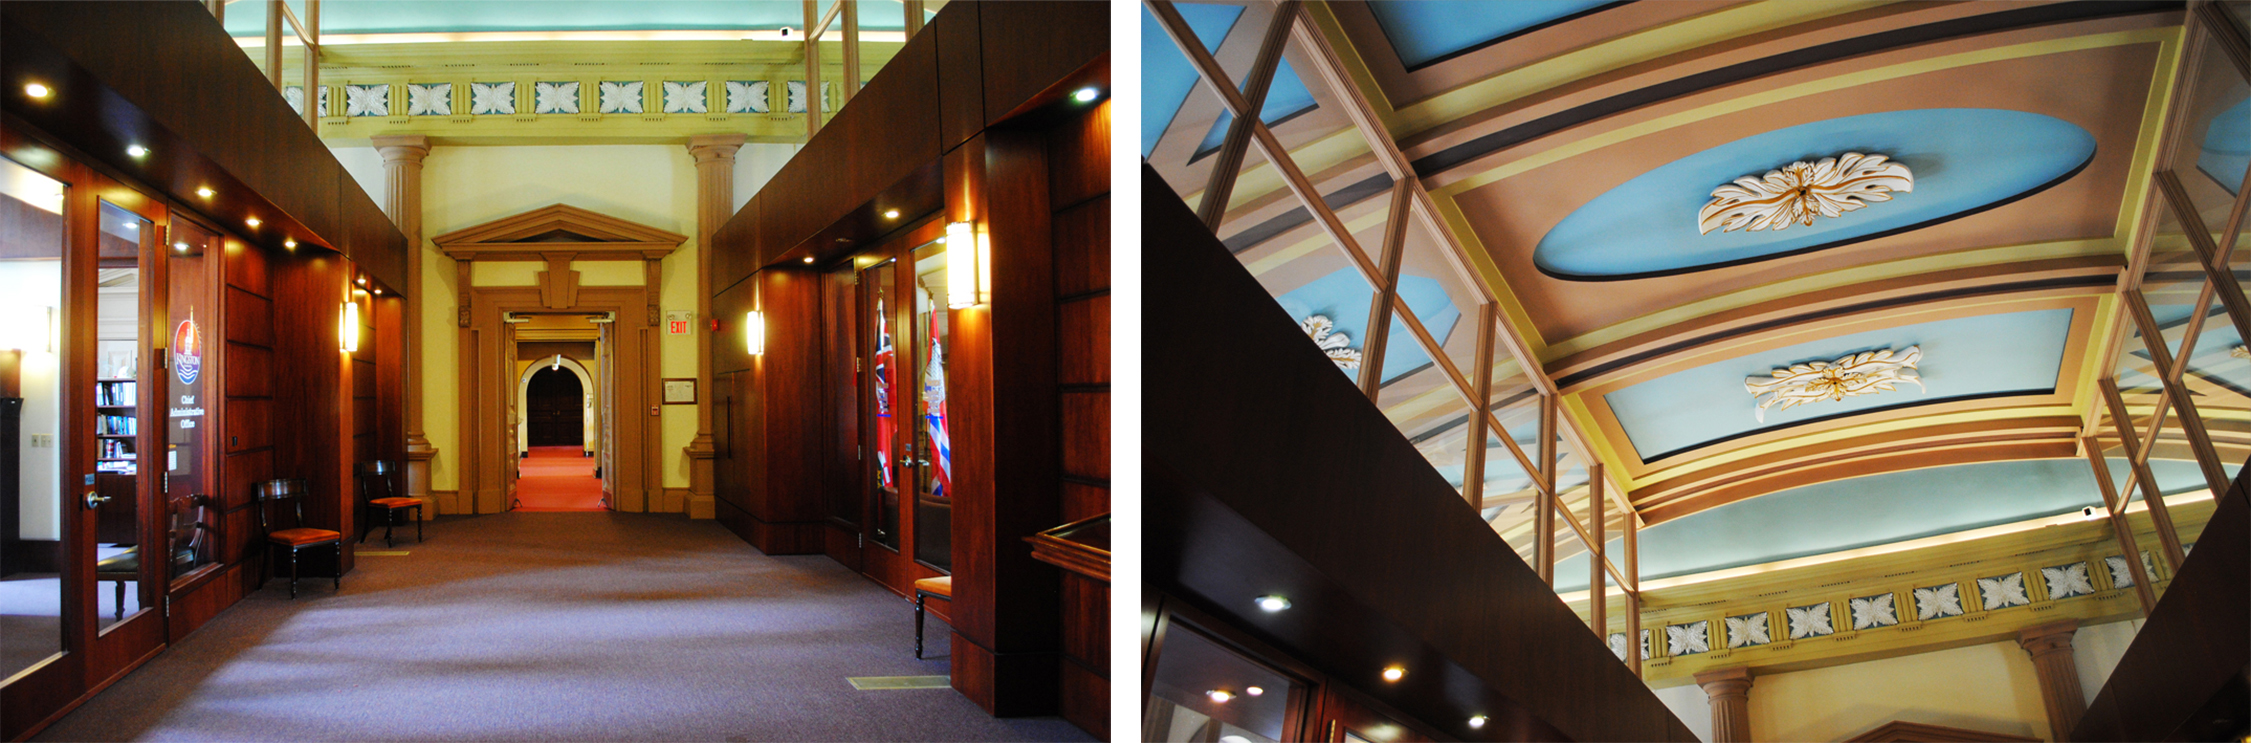 Left: Interior of municipal offices with small wood portico leading to an enfilade beyond. Right: Ceiling detail of the municpal offices showing painted orange and blue coffers with plant-form ornaments. 